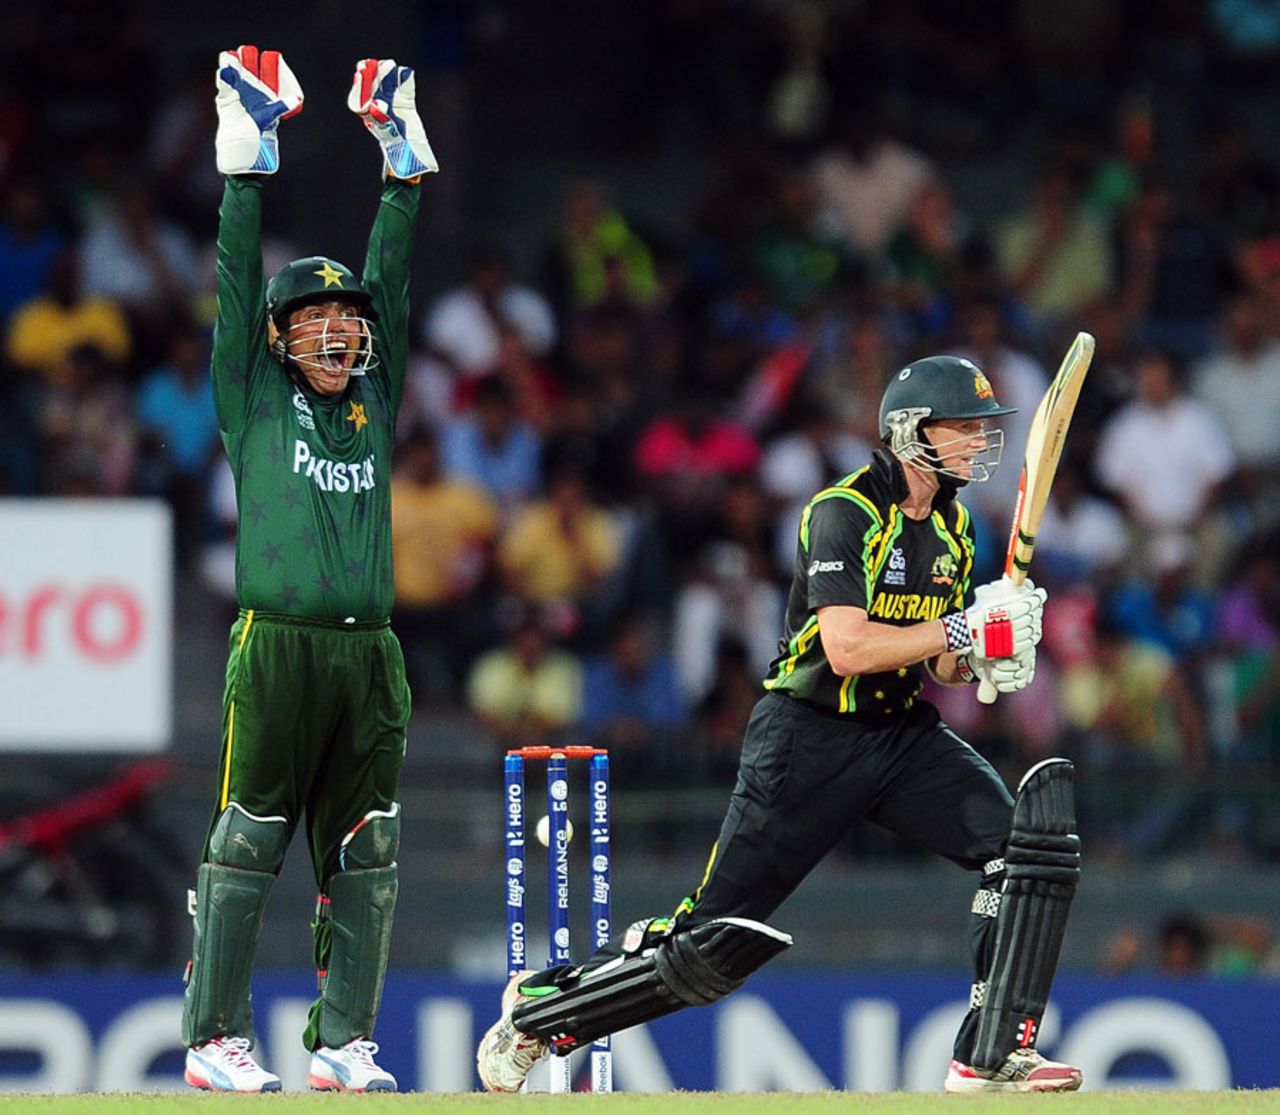 George Bailey became the third lbw victim in the innings, Australia v Pakistan, Super Eights, World Twenty20 2012, Colombo, October 2, 2012